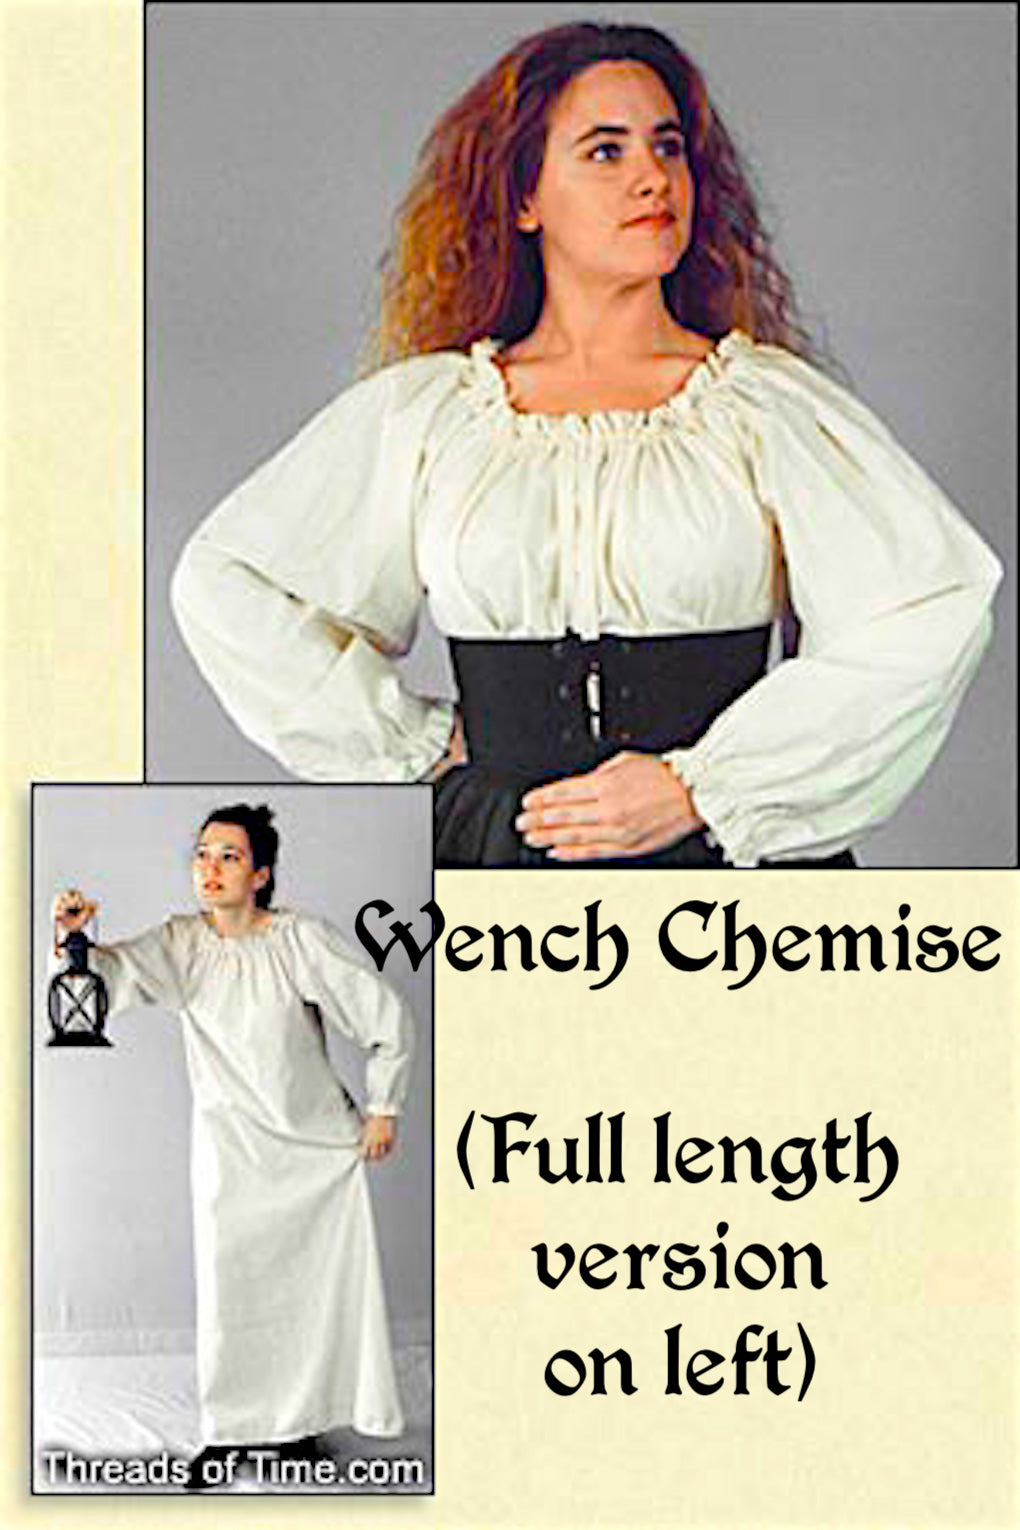 Wench Chemise - Plain, Lace, Celtic or Thistle Embroidery